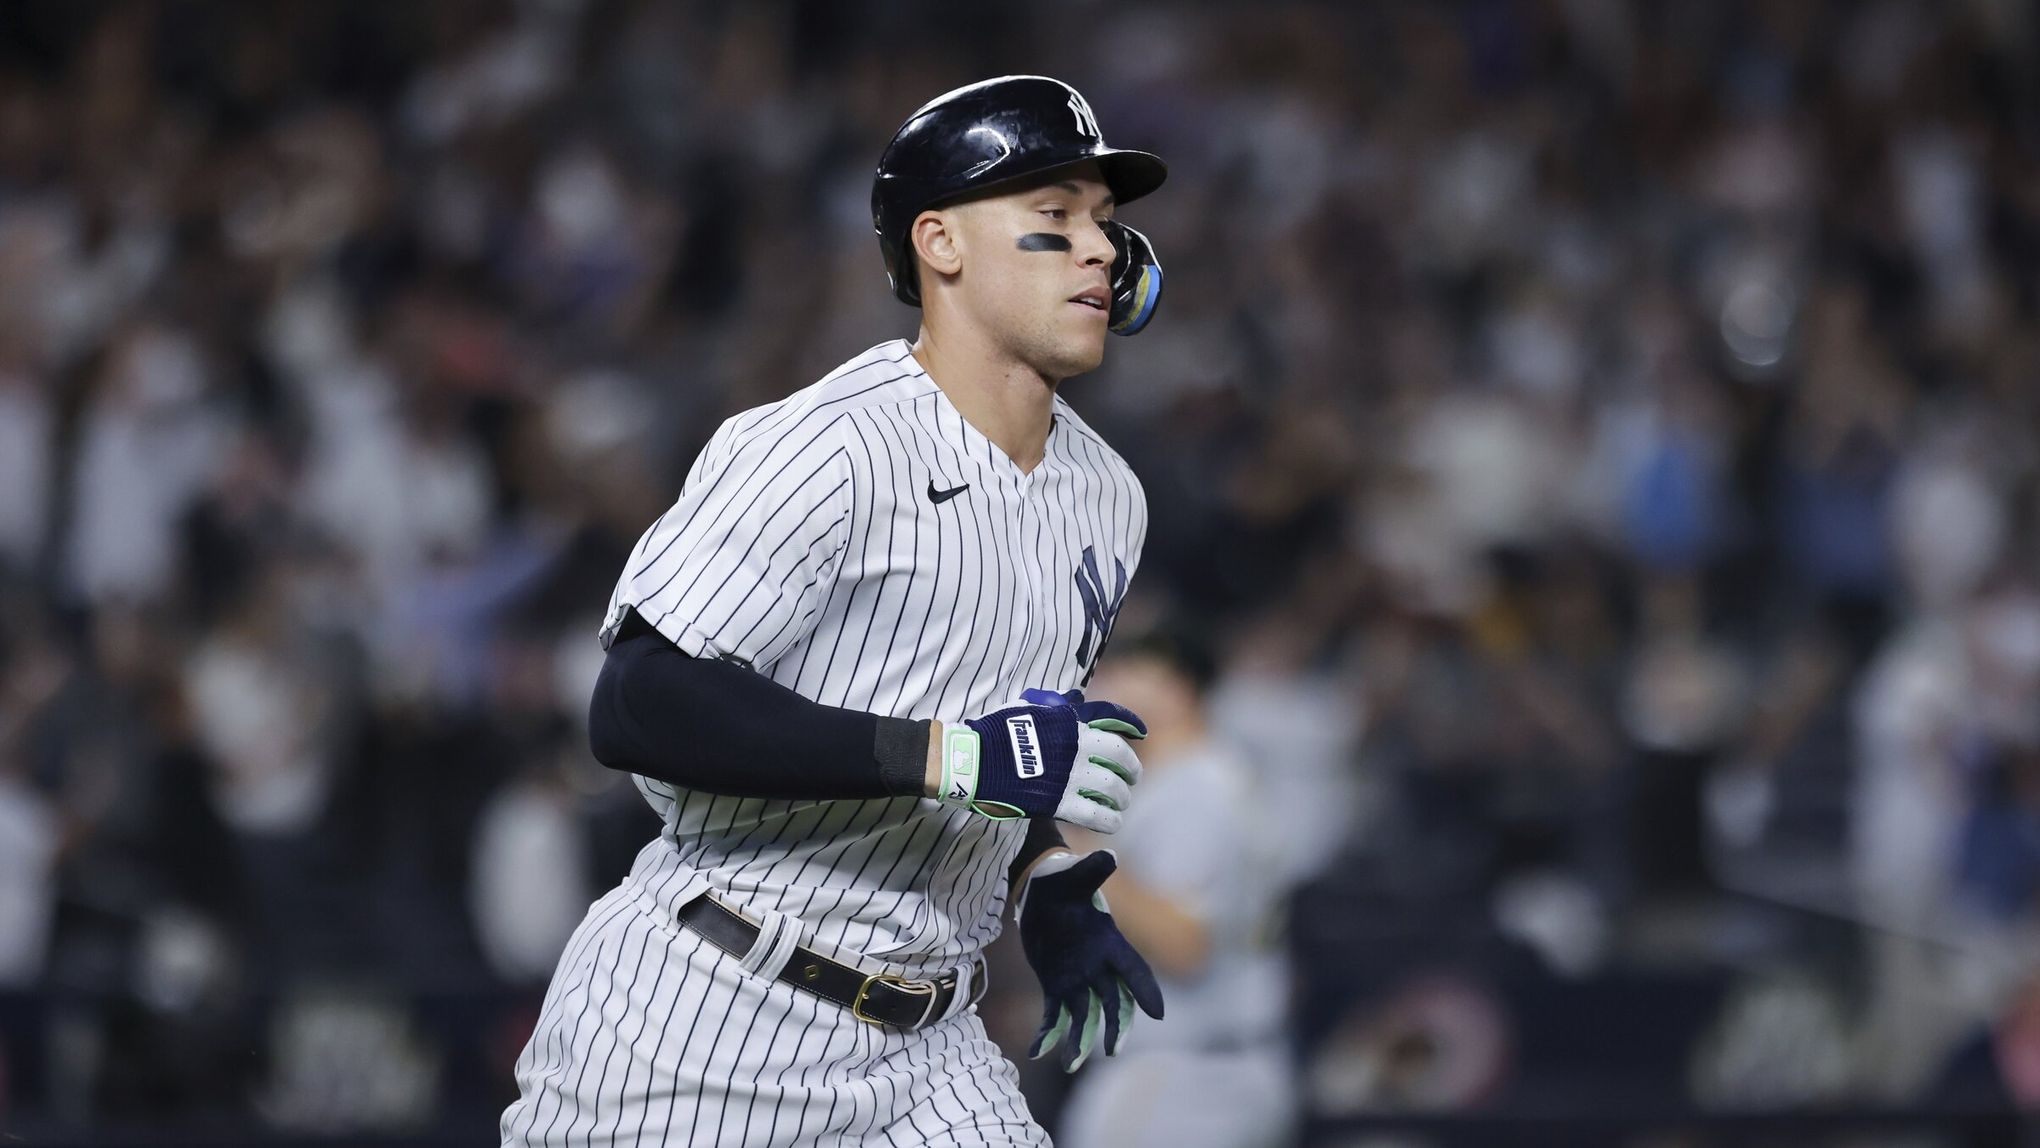 Aaron Judge is Objectively a Top 10 Player in the MLB